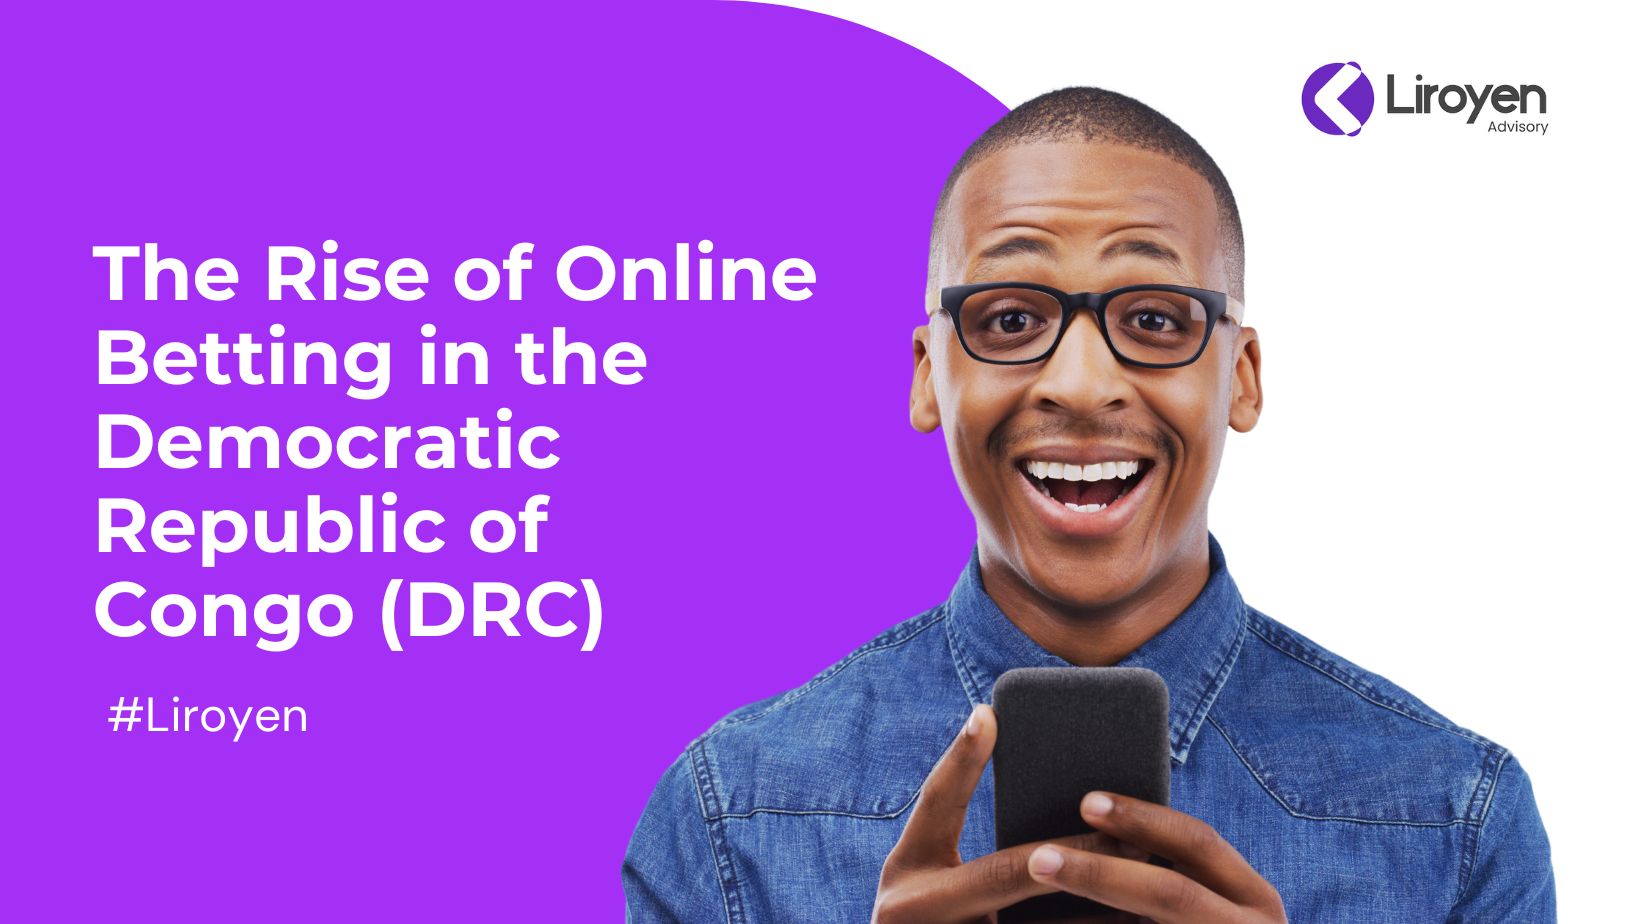 The Rise of Online Betting in the Democratic Republic of Congo (DRC)